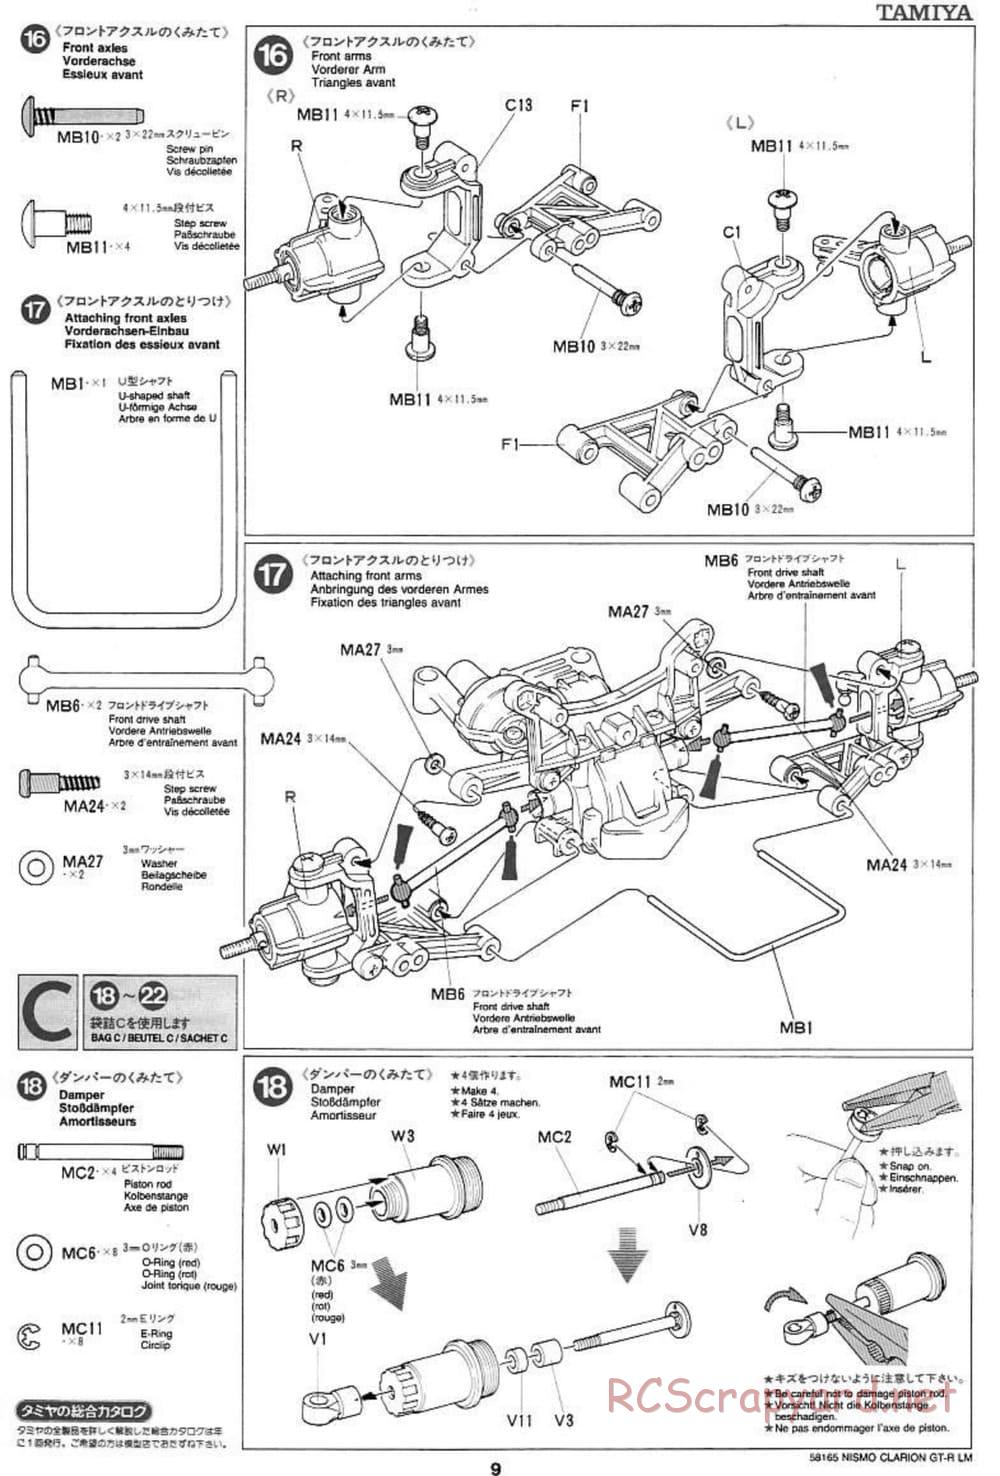 Tamiya - Nismo Clarion GT-R LM - TA-02W Chassis - Manual - Page 9